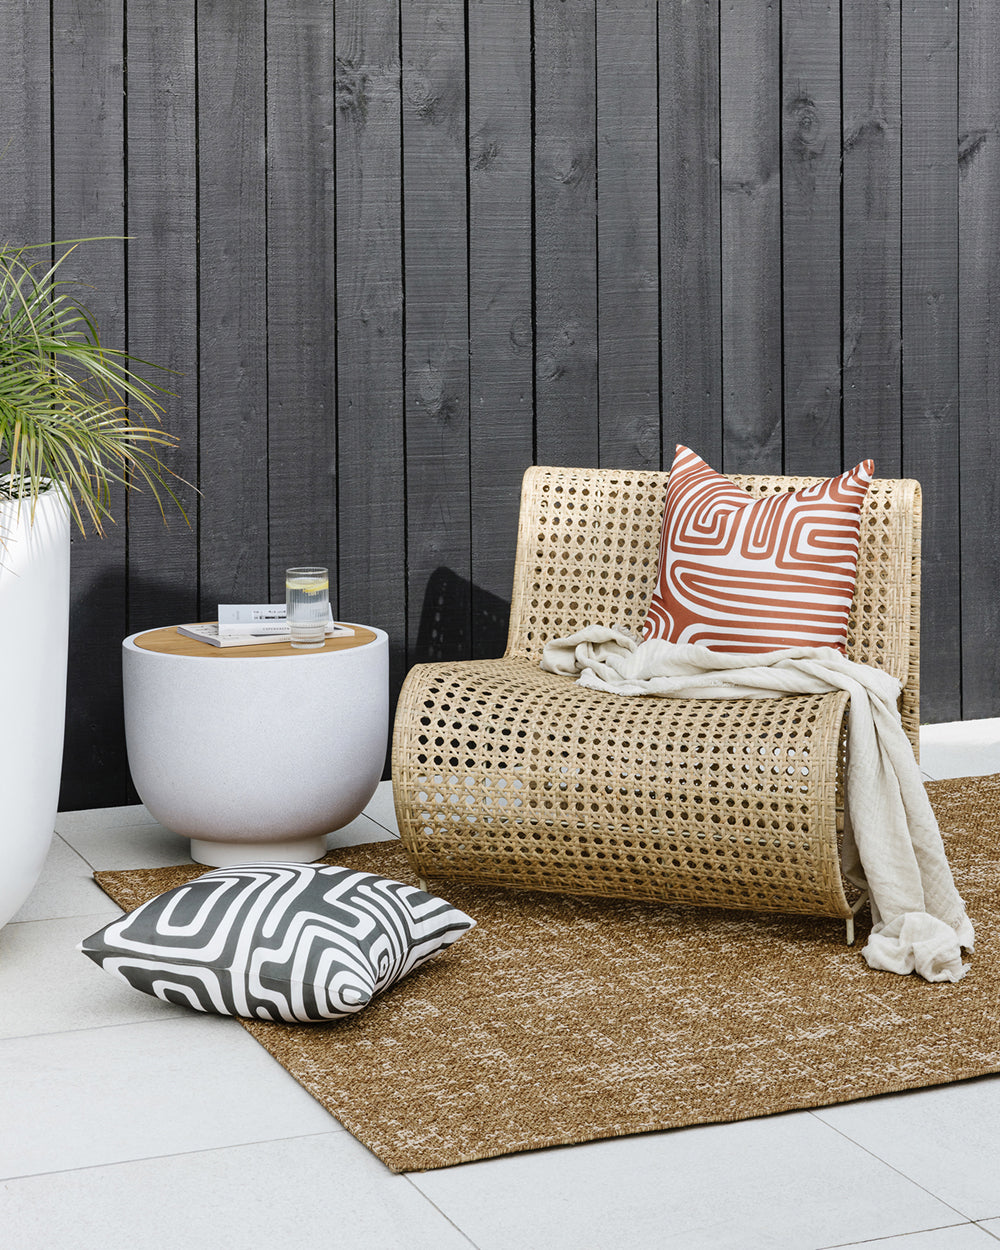 Ano outdoor cushion, rust abstract lines on the Ano on a rattan seat in an outdoor setting. Black cladding wooden wall with pico cushion on a taupe outdoor rug, concrete side table with drinks and a concrete large pot with greenery